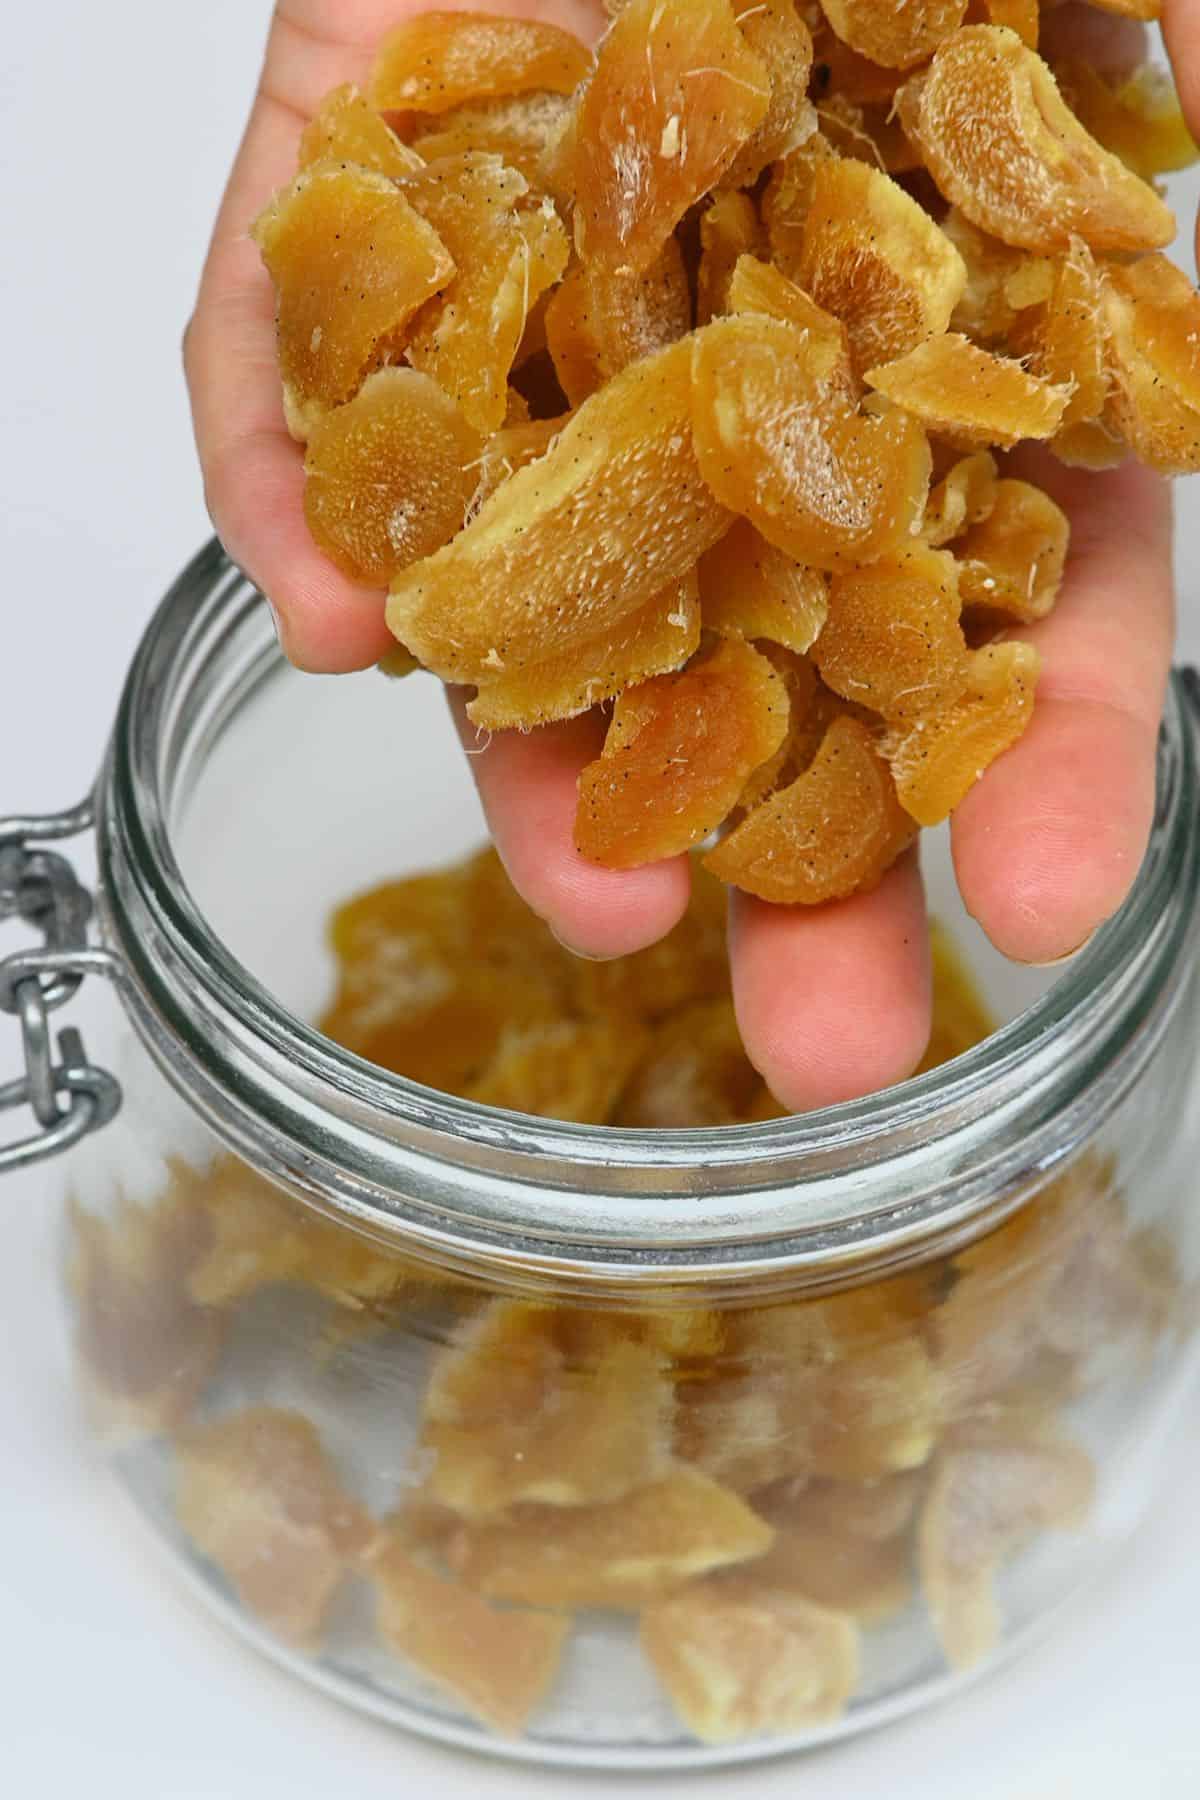 Placing crystallized ginger in a jar